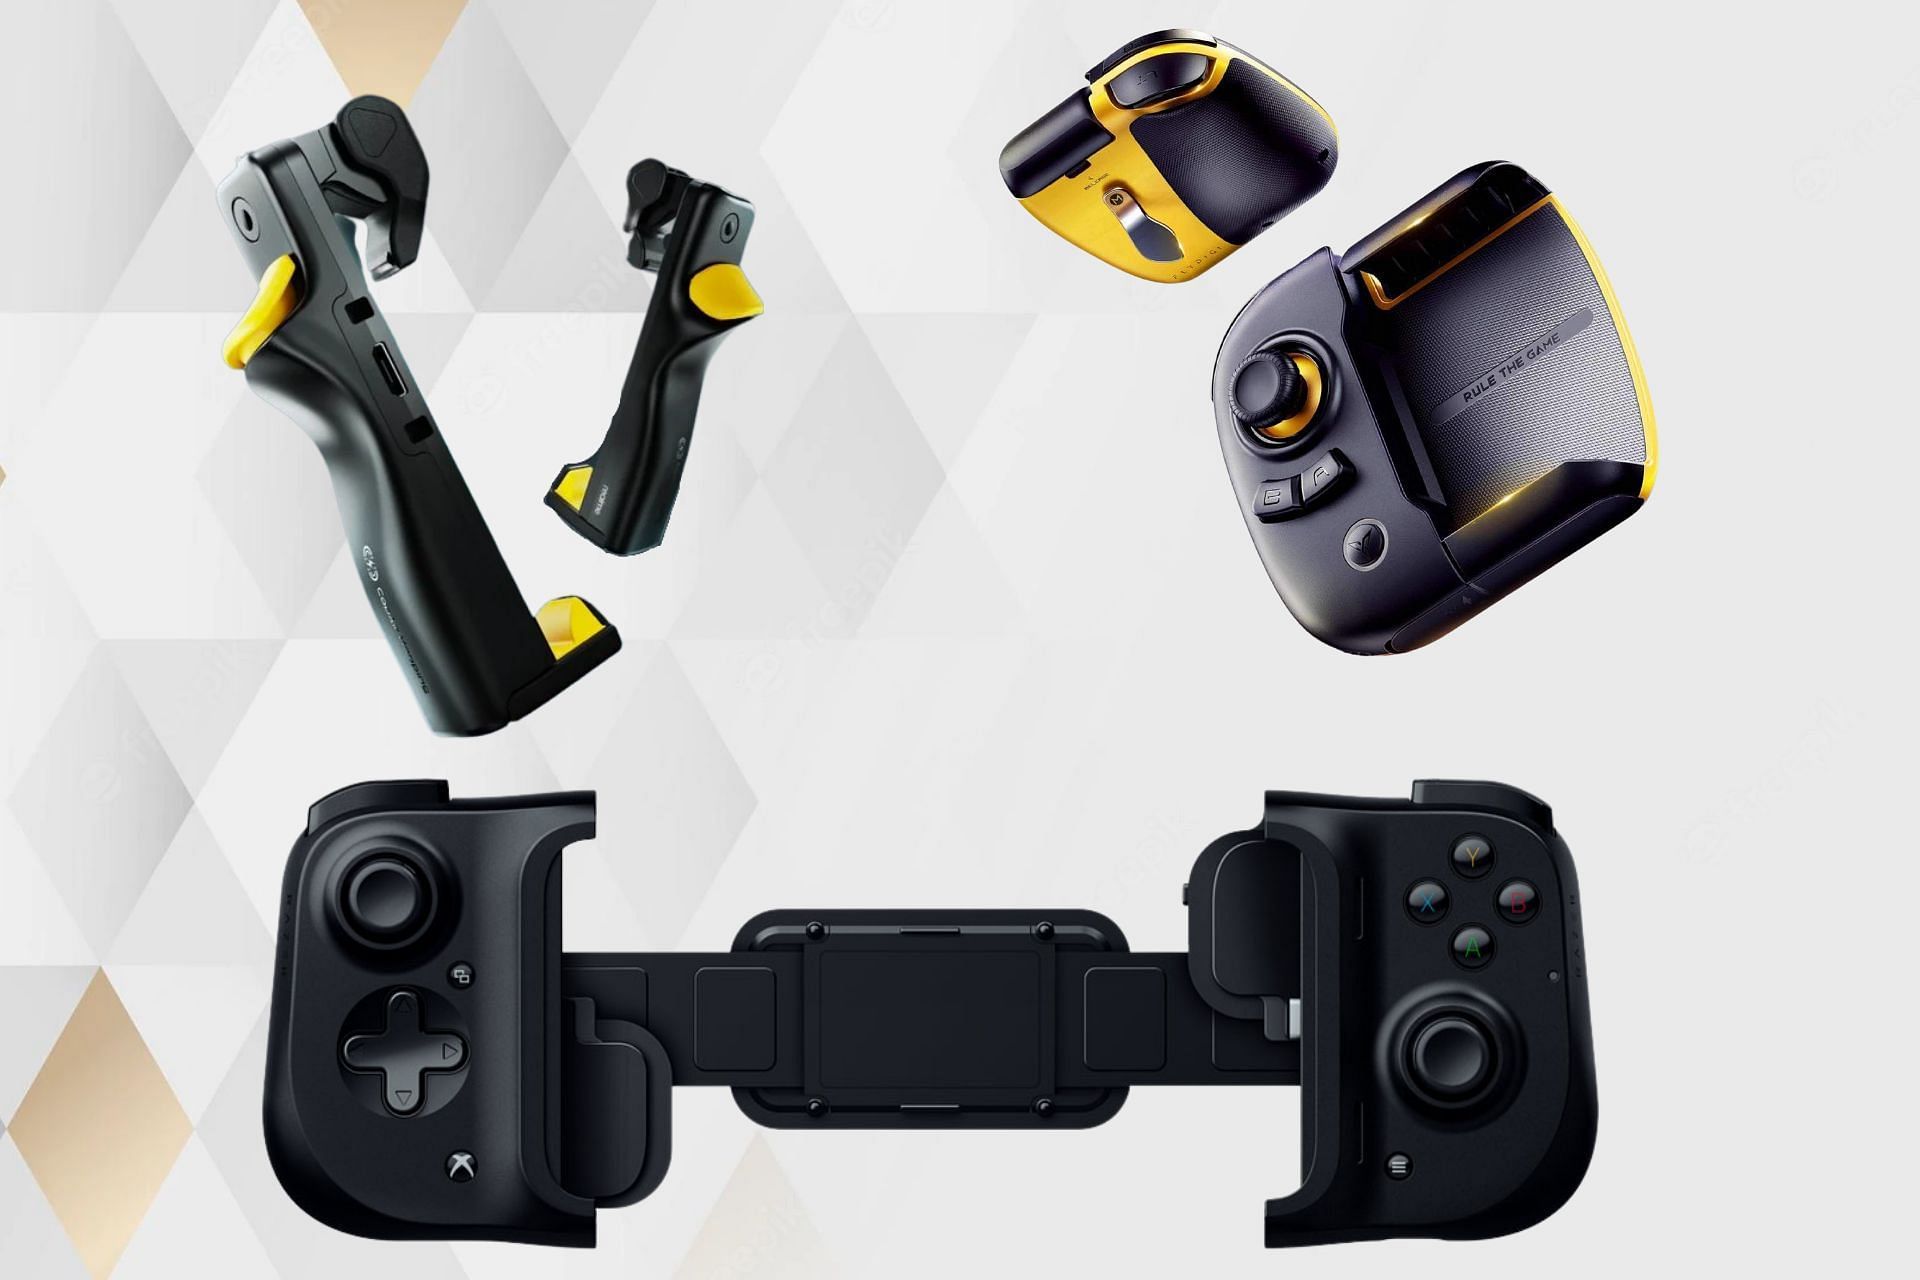 Accessories can help players improve the gaming experience (Image via Sportskeeda)